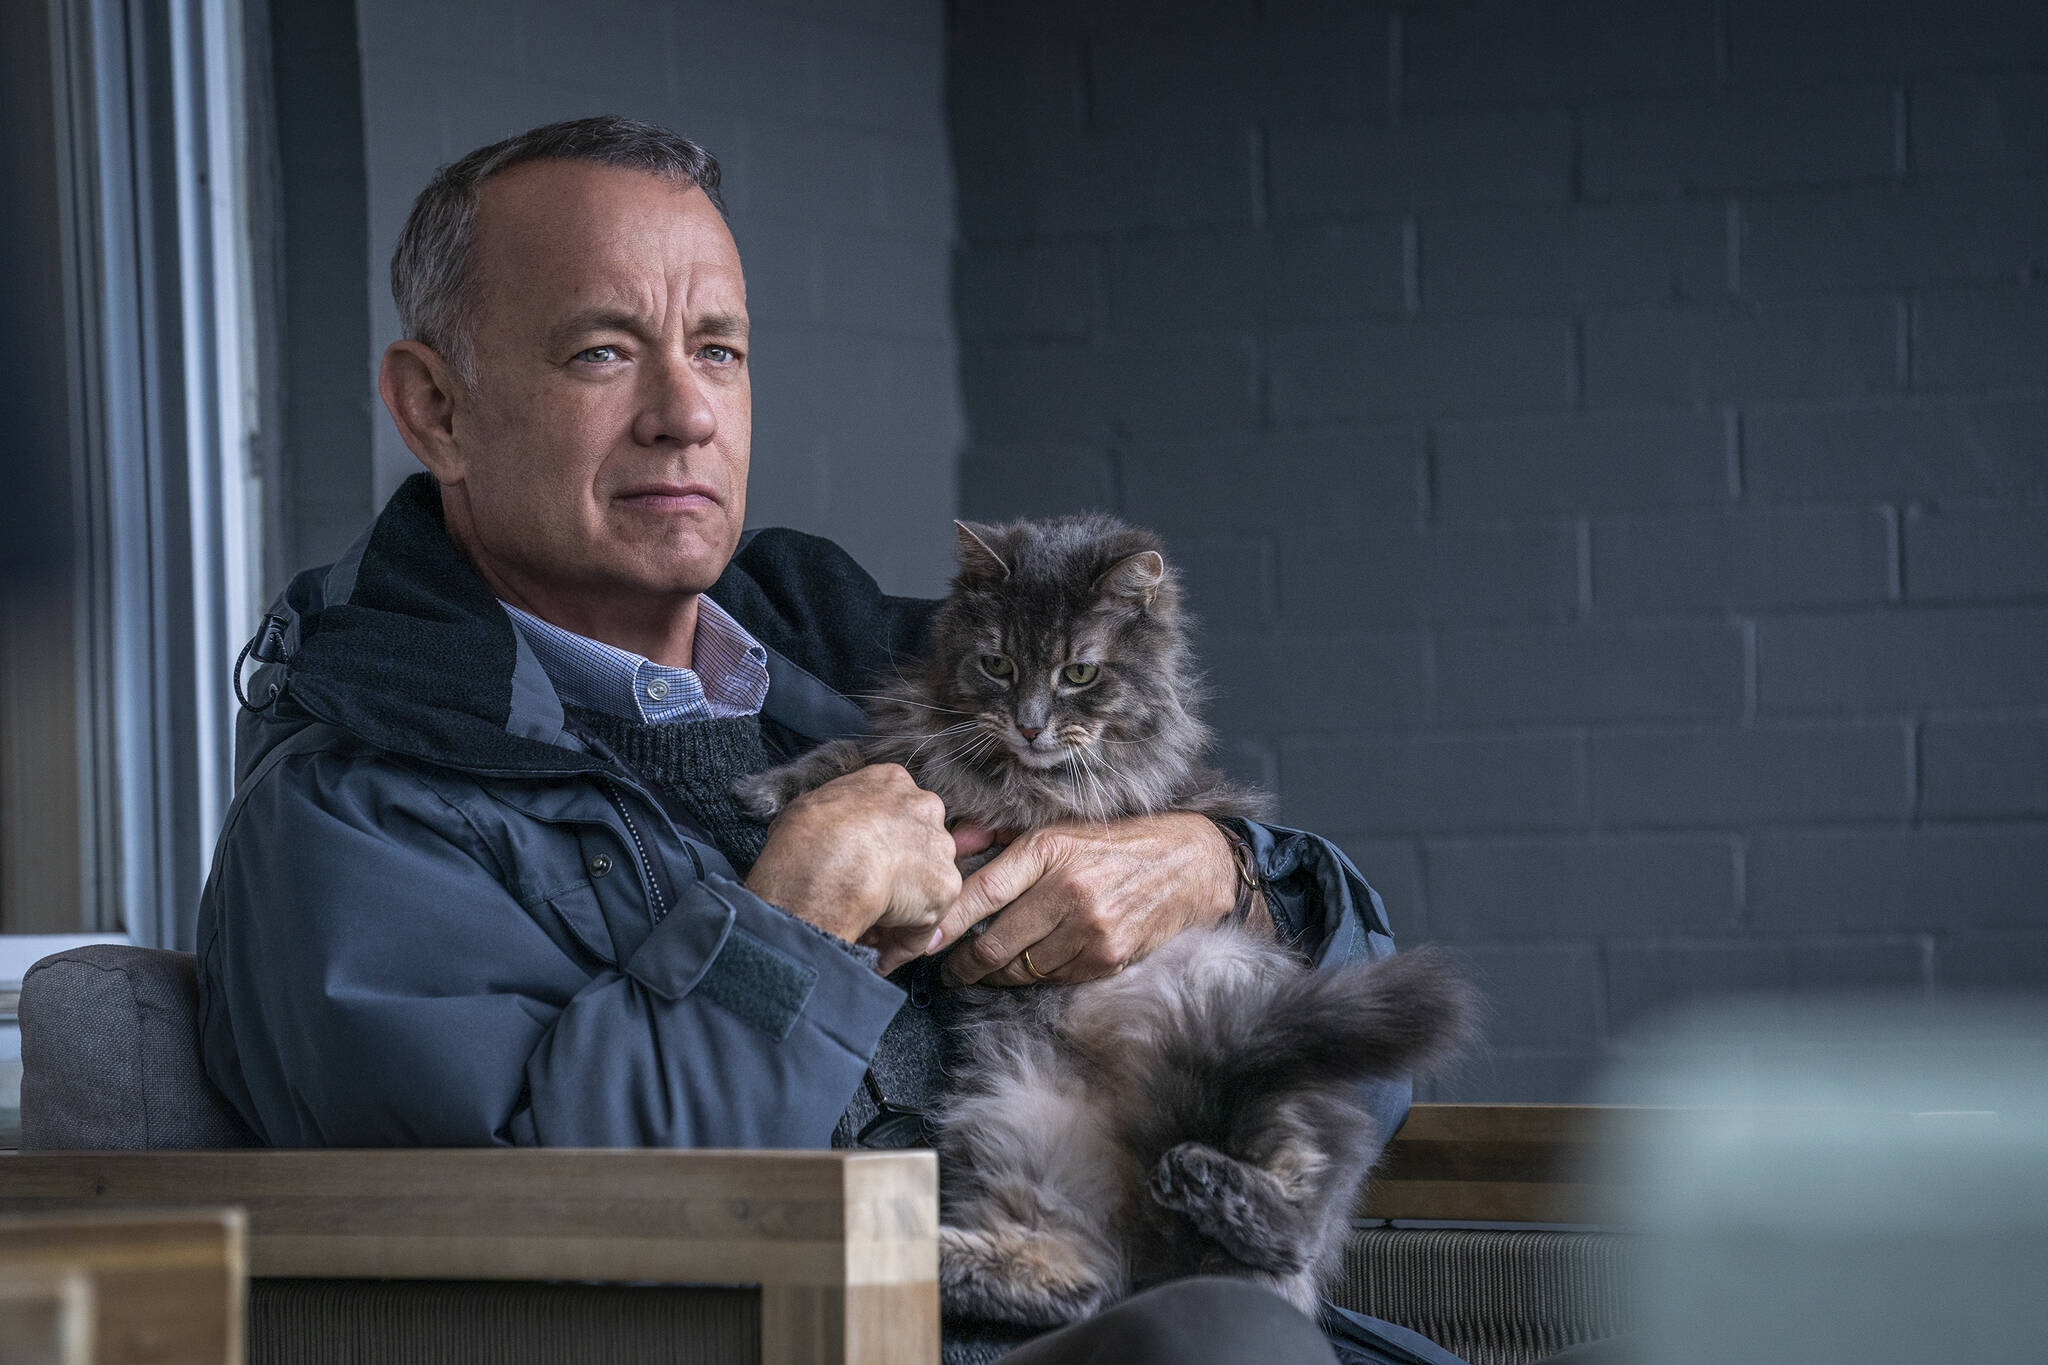 This image released by Sony Pictures shows Tom Hanks in a scene from “A Man Called Otto.” (Niko Tavernise/Sony Pictures via AP)